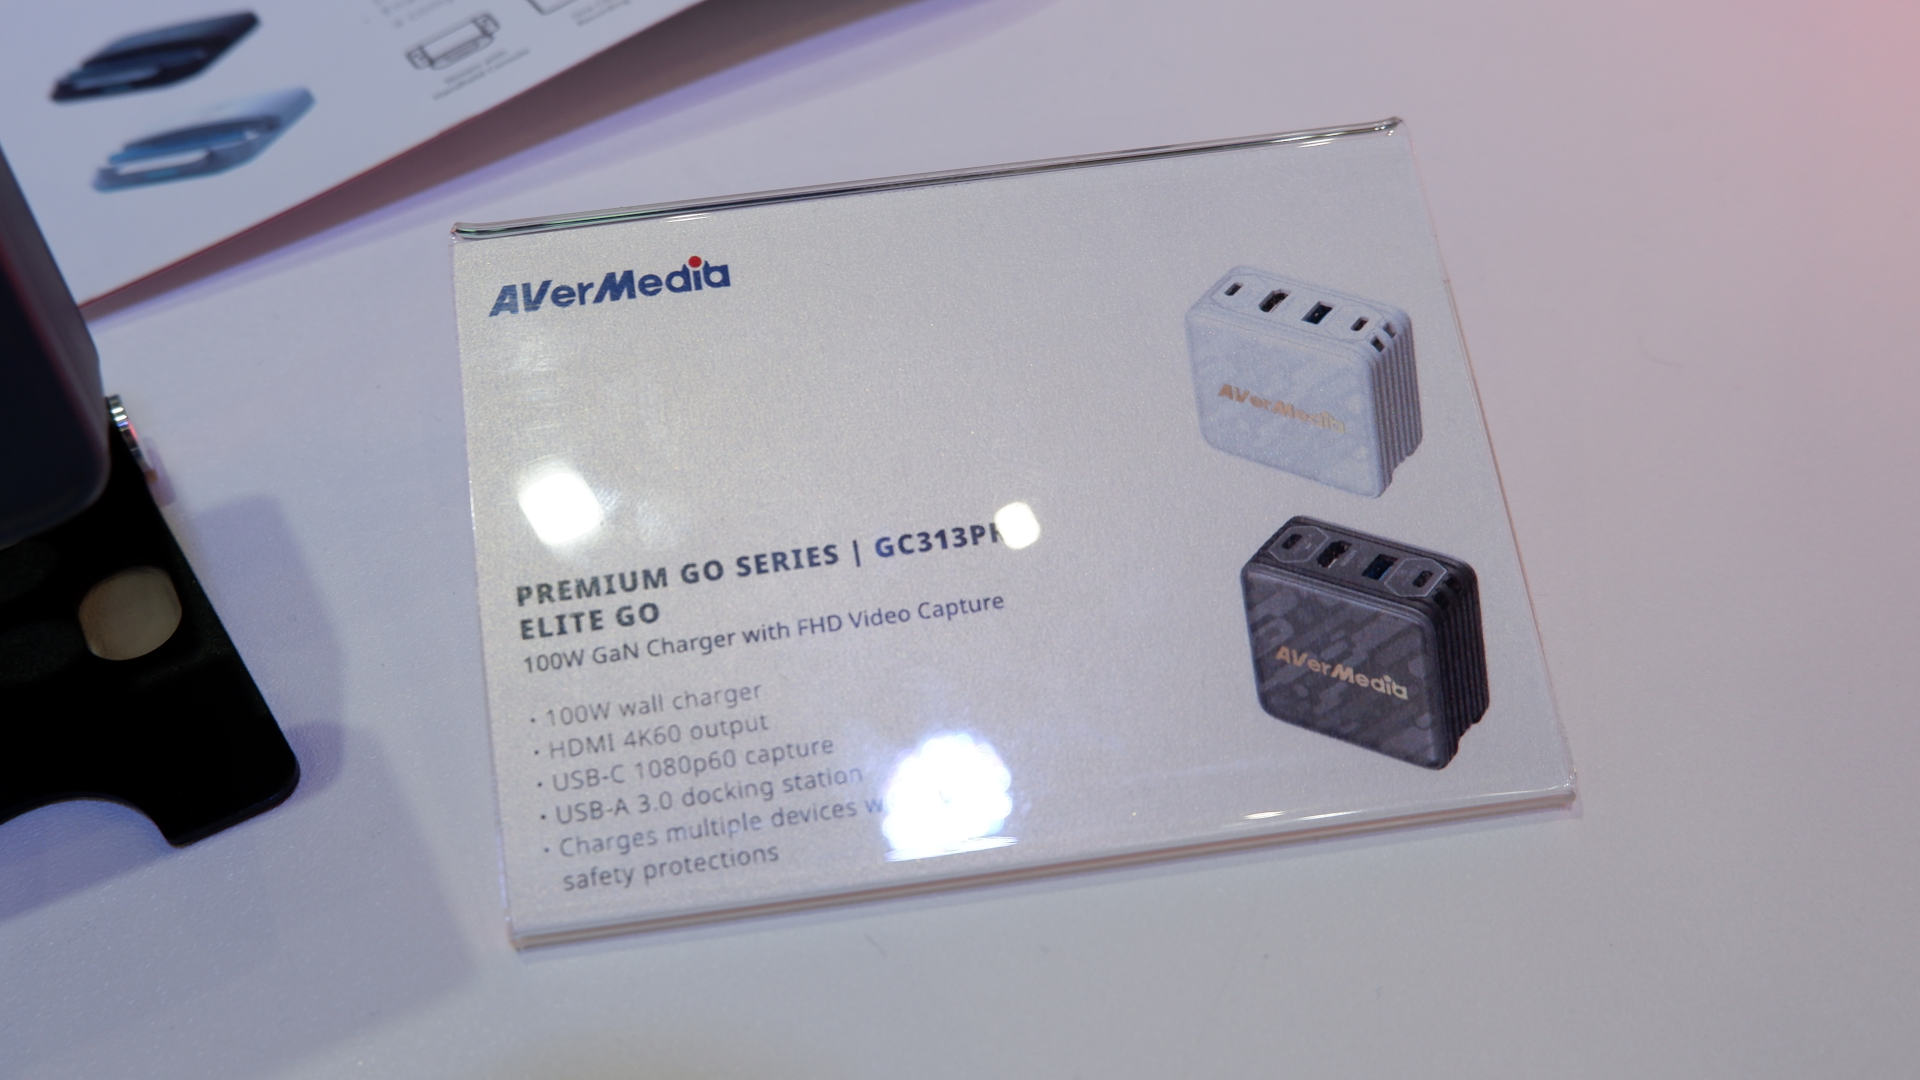 Photo of the Avermedia Premium Go series of GaN chargers, with HDMI 4K output, USB hub, and 1080p capture in the Elite Go